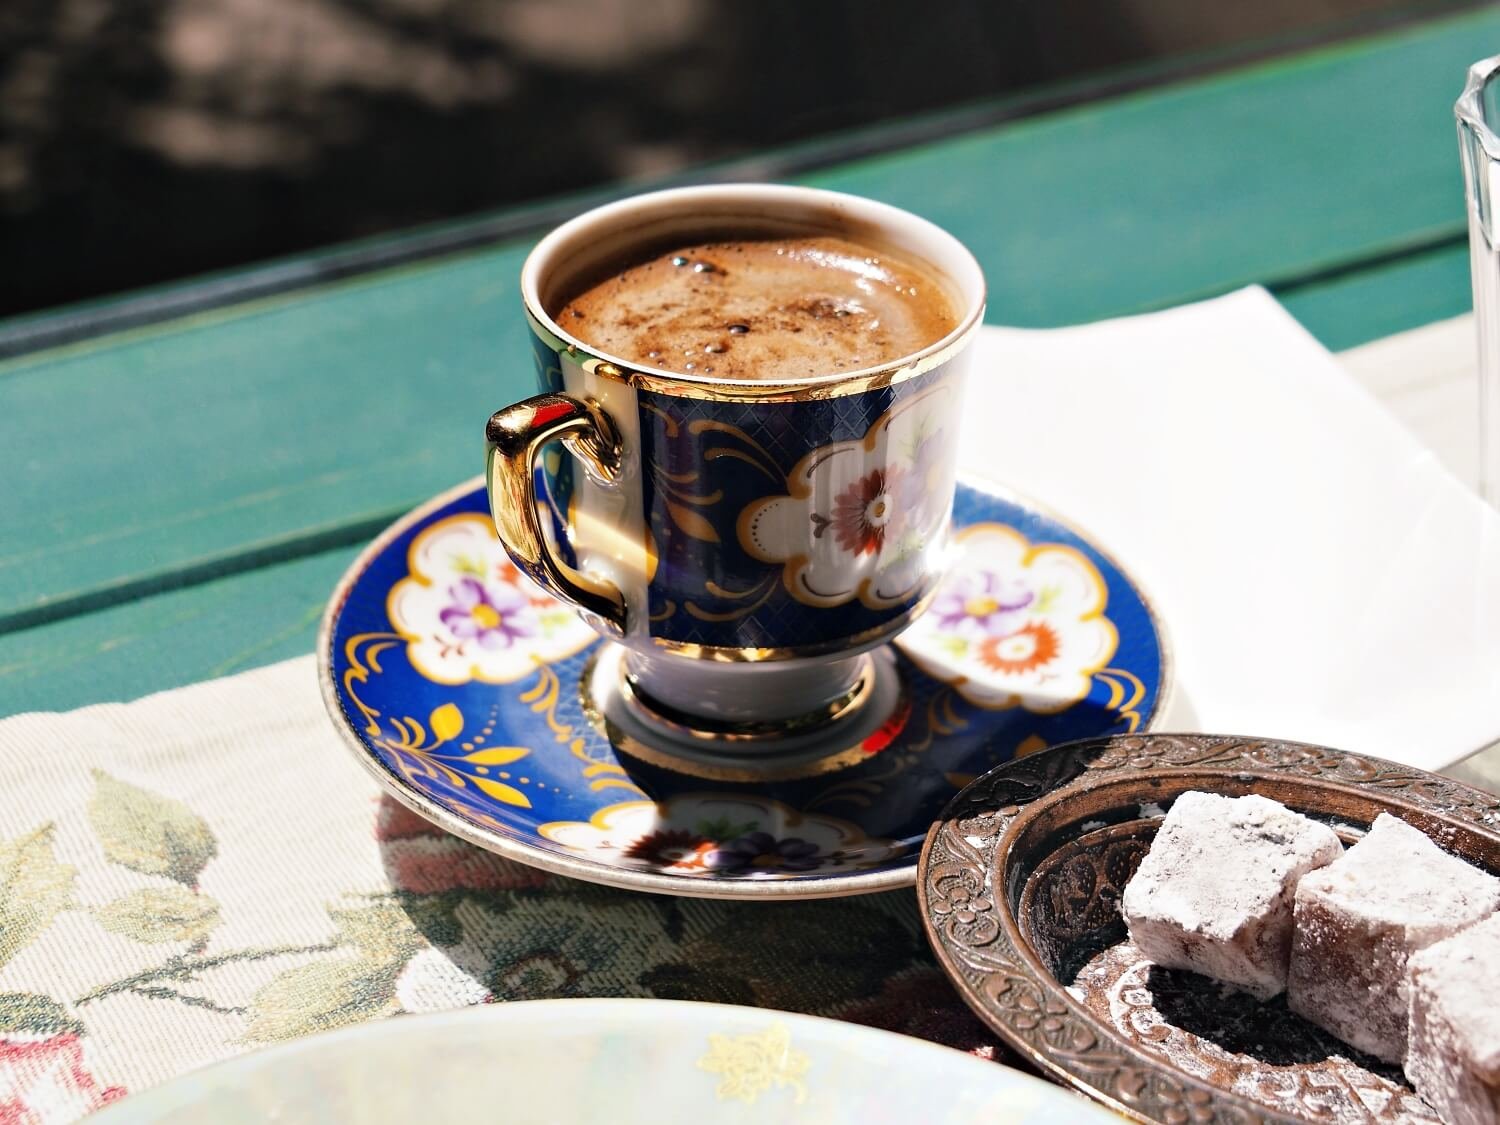 A Turkish coffee on a blue flowered ceramic cup with Turkish delight